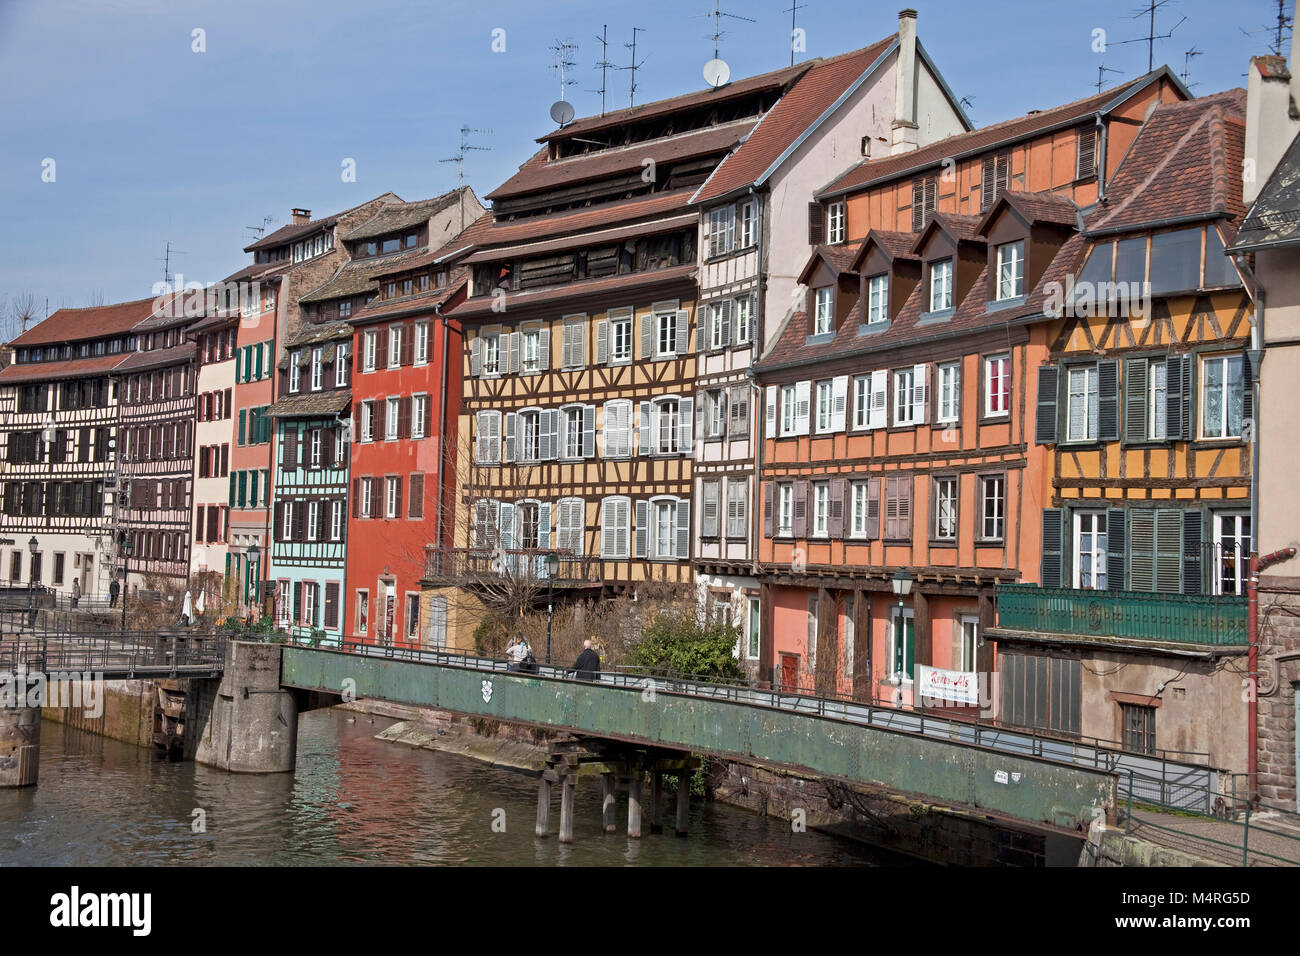 Idyllic half-timbered houses at Ill river, La Petite France (Little France), Strasbourg, Alsace, Bas-Rhin, France, Europe Stock Photo